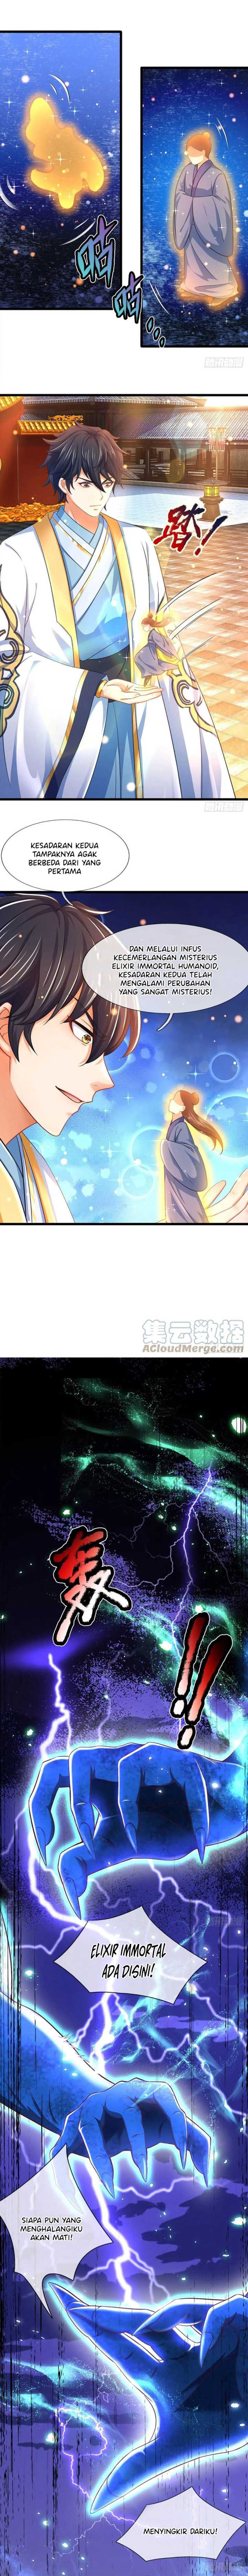 Star Sign In To Supreme Dantian Chapter 125